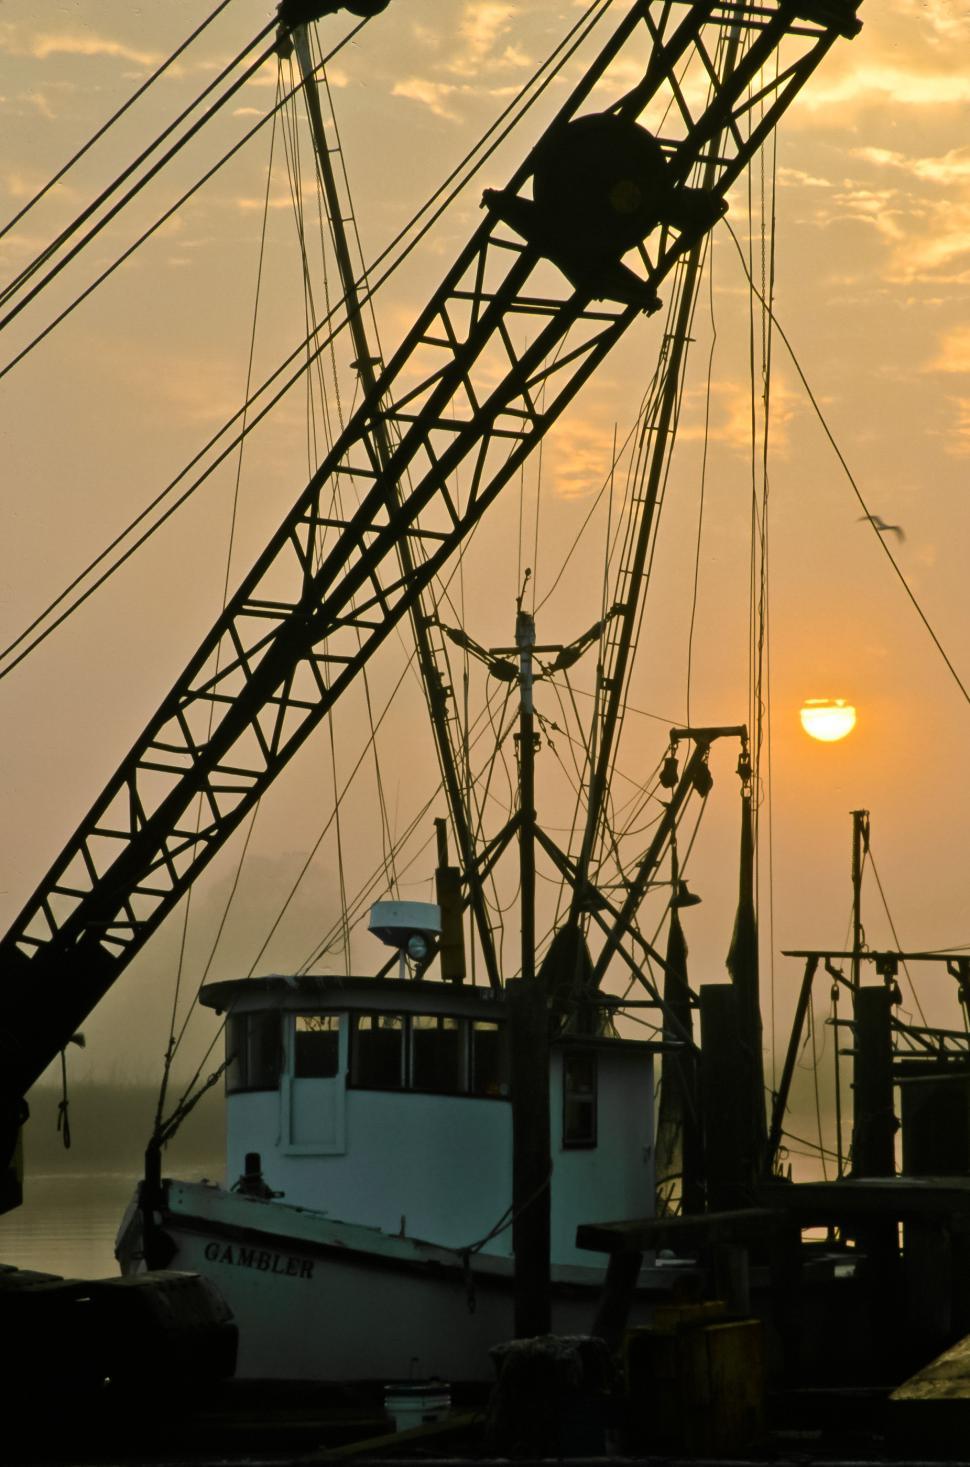 Free Image of Boat in the Harbor 